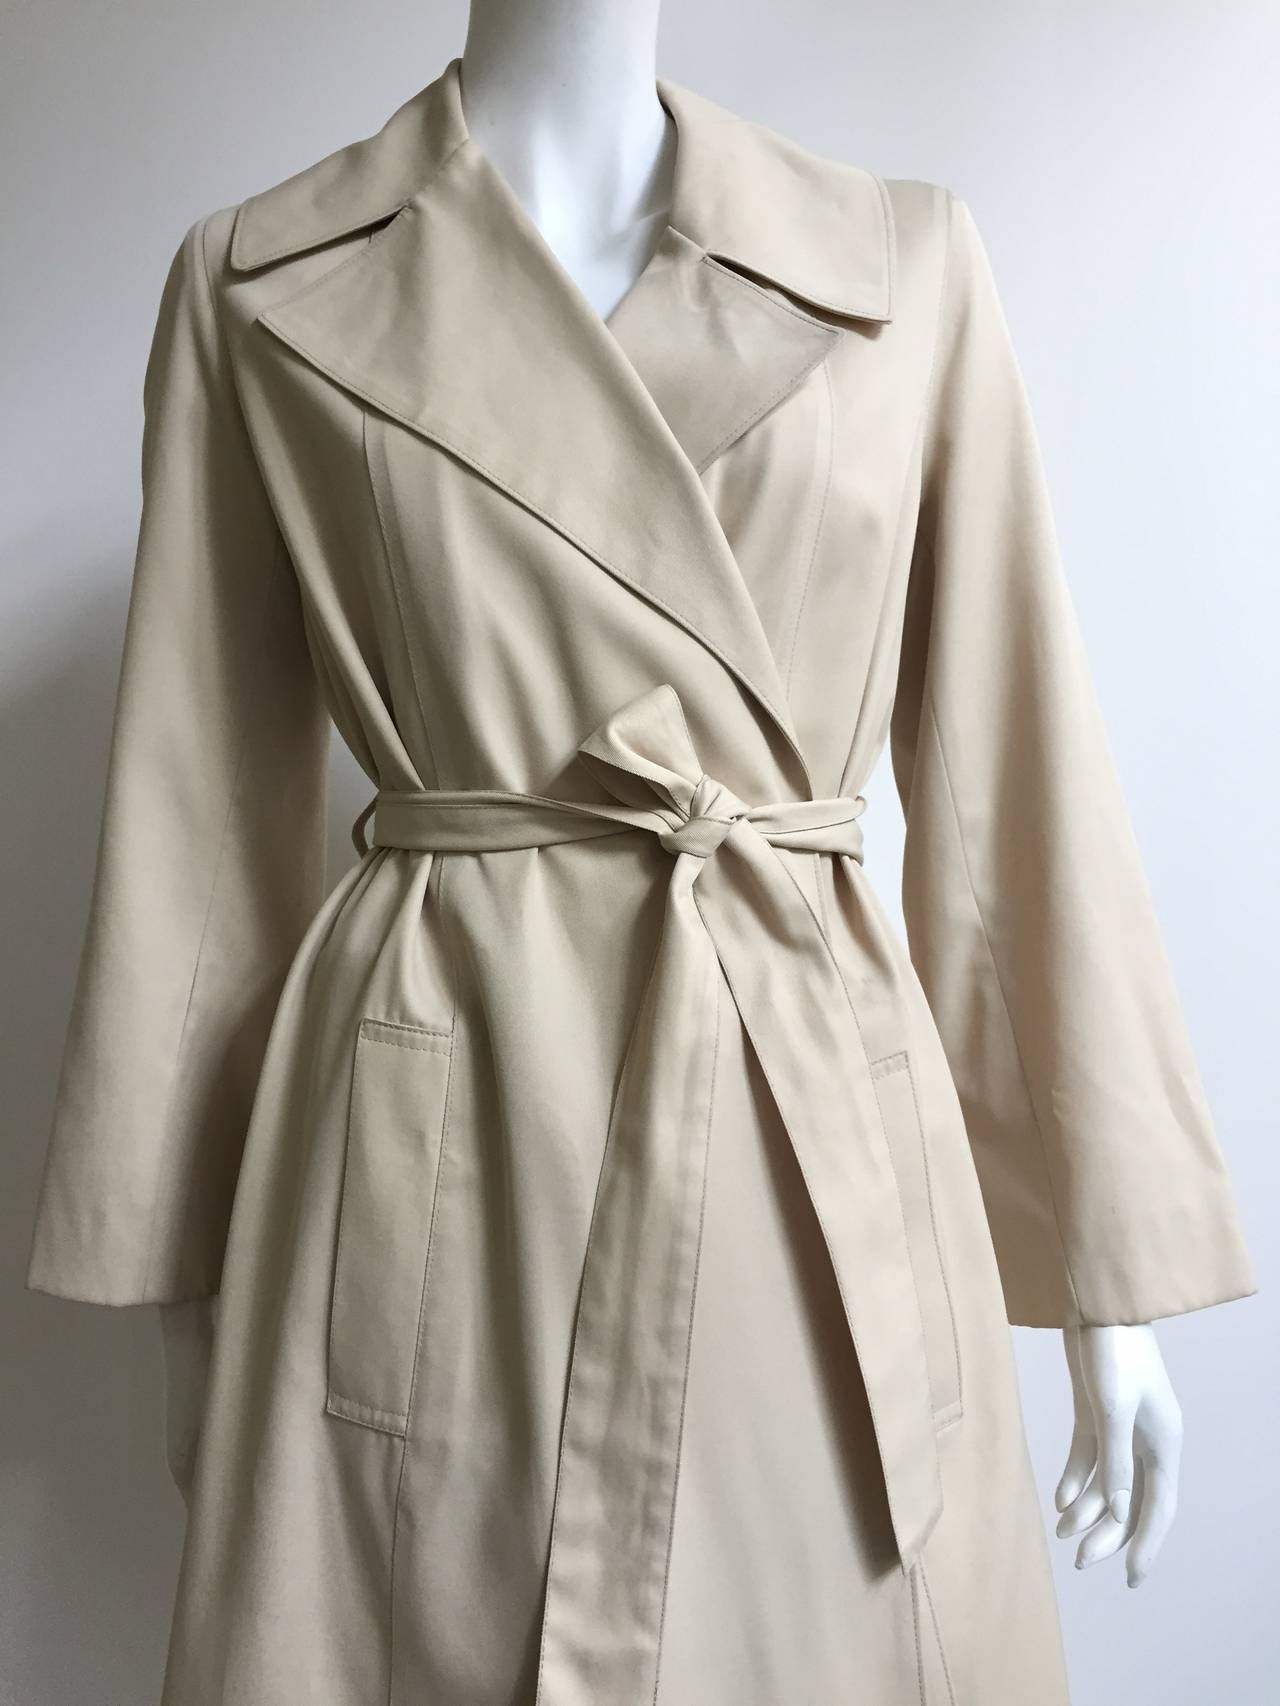 Halston for Misty Harbor 1970s trench coat is a size 10.
Stylish and forever chic this Halston trench coat can work any room at any place. Timeless and classic.
Trench coat is lined. 
Just dry cleaned.
Measurements are:
24"